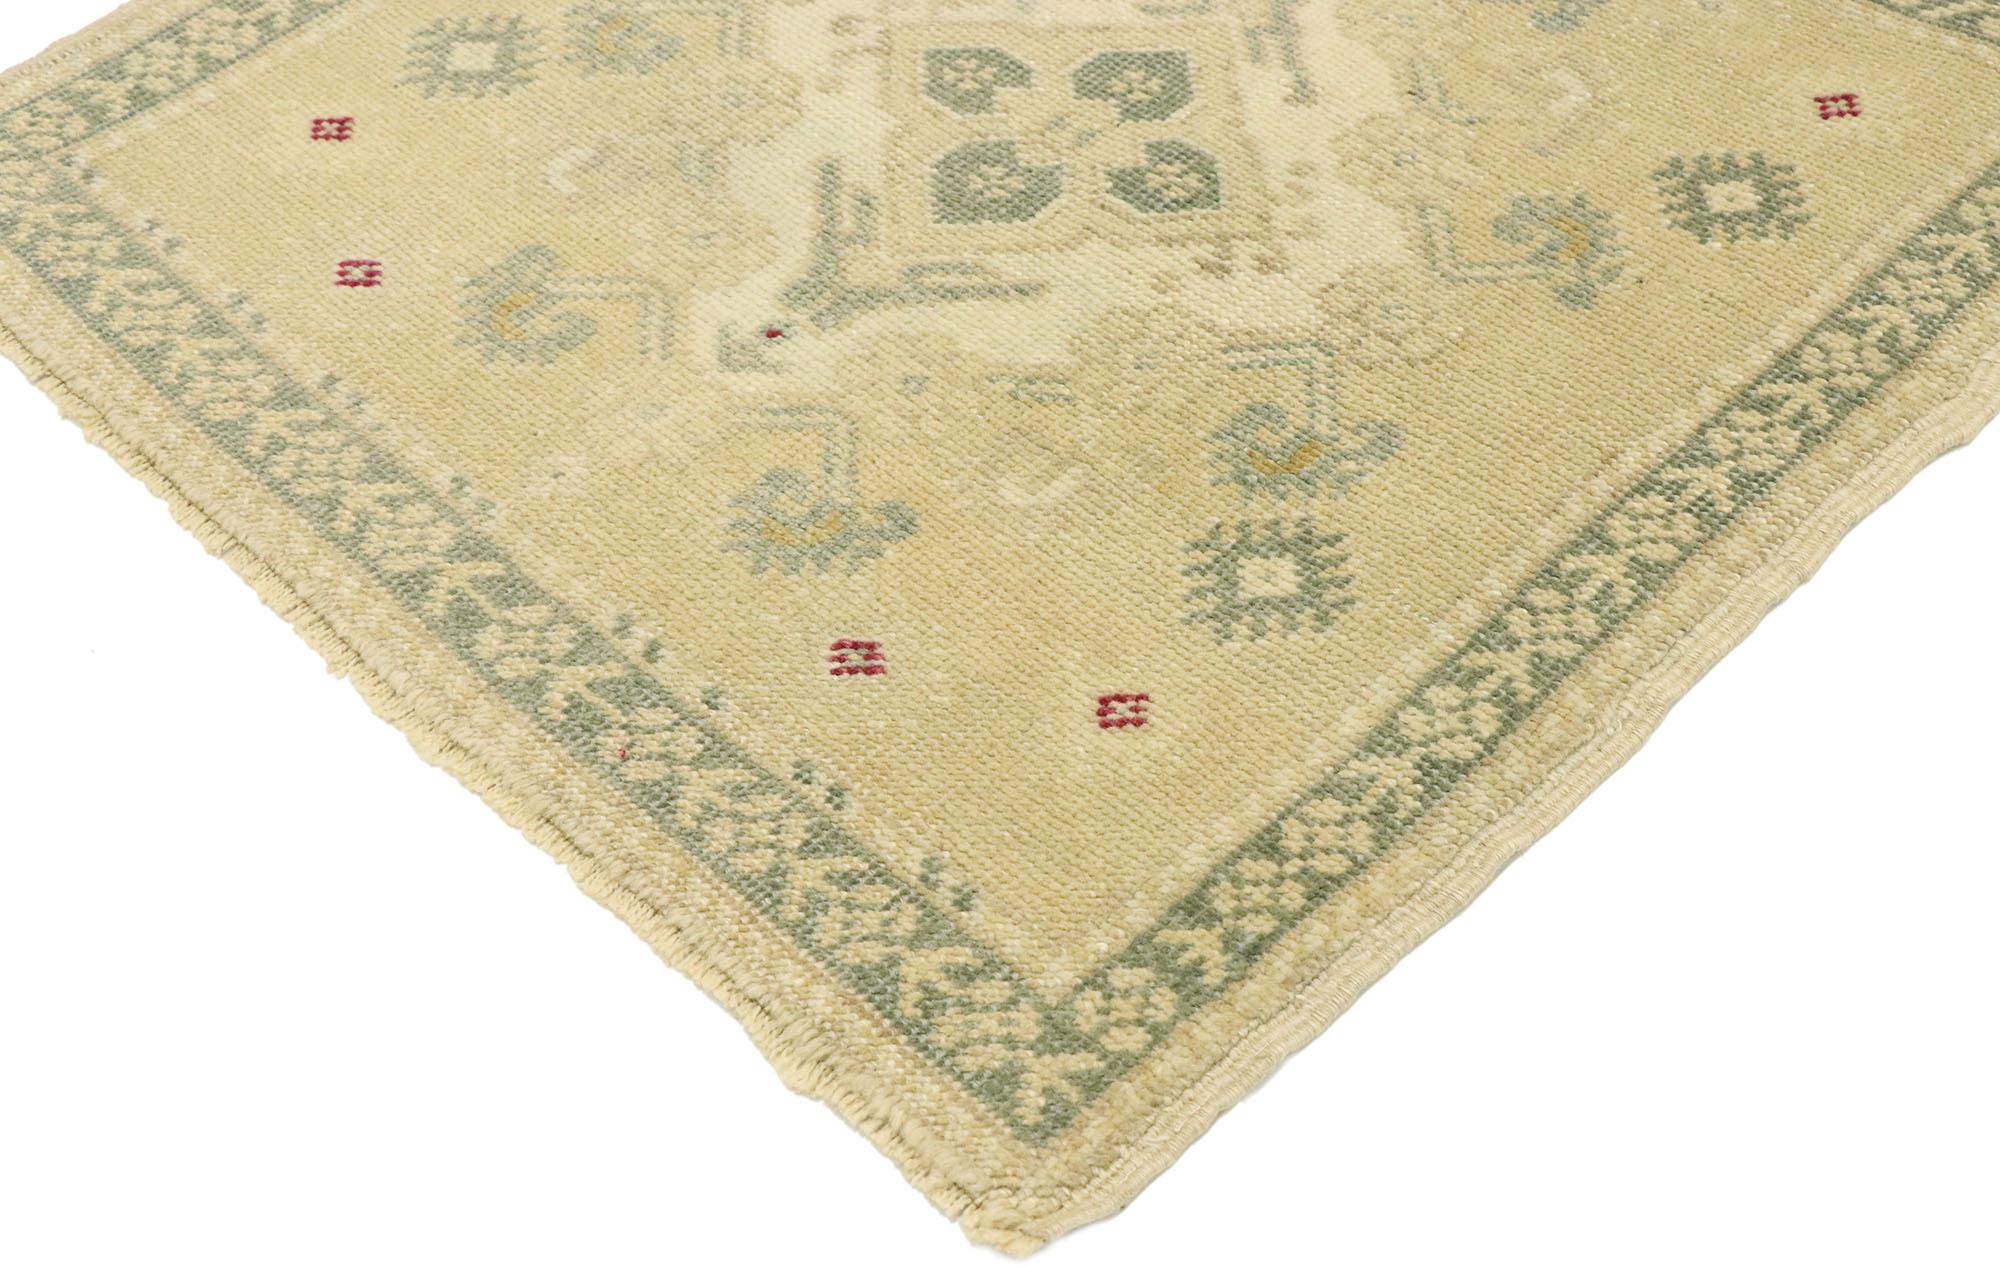 52999, vintage Turkish Oushak Yastik scatter rug with neoclassical cottage style, small square accent rug. Effortless beauty and simplicity meet soft, bespoke vibes with a neoclassical cottage style in this hand knotted wool vintage Turkish Oushak